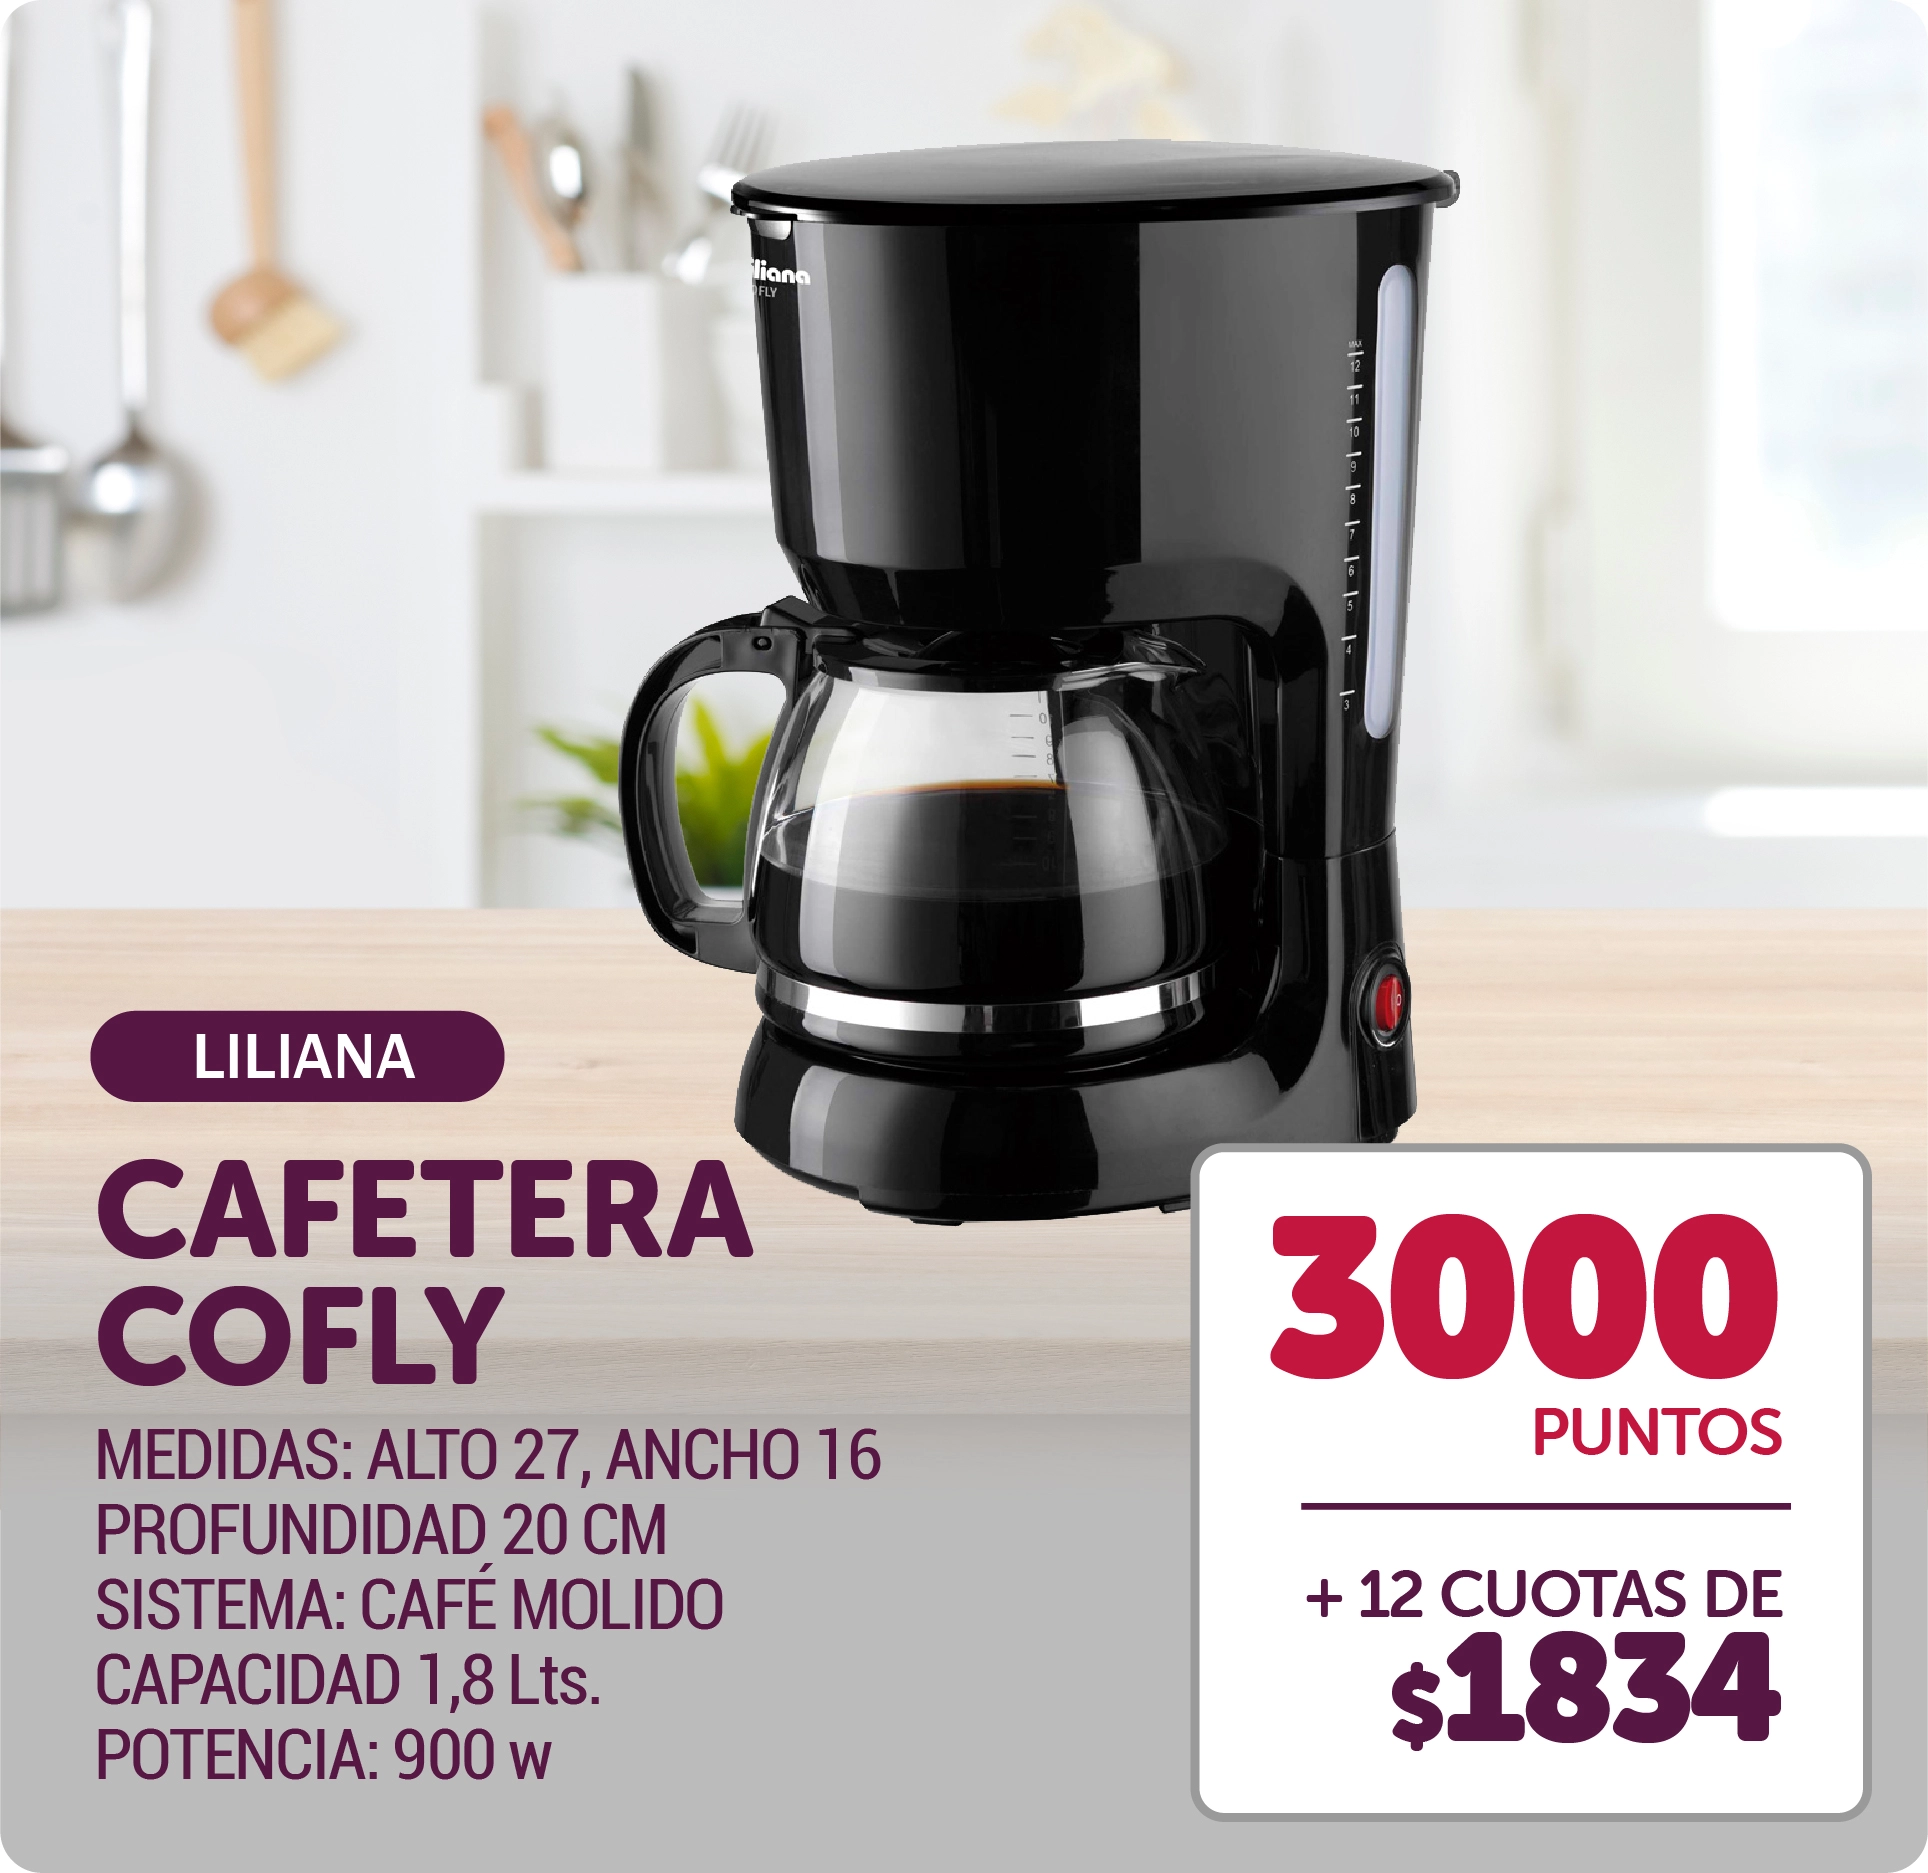 Cafetera Cofly